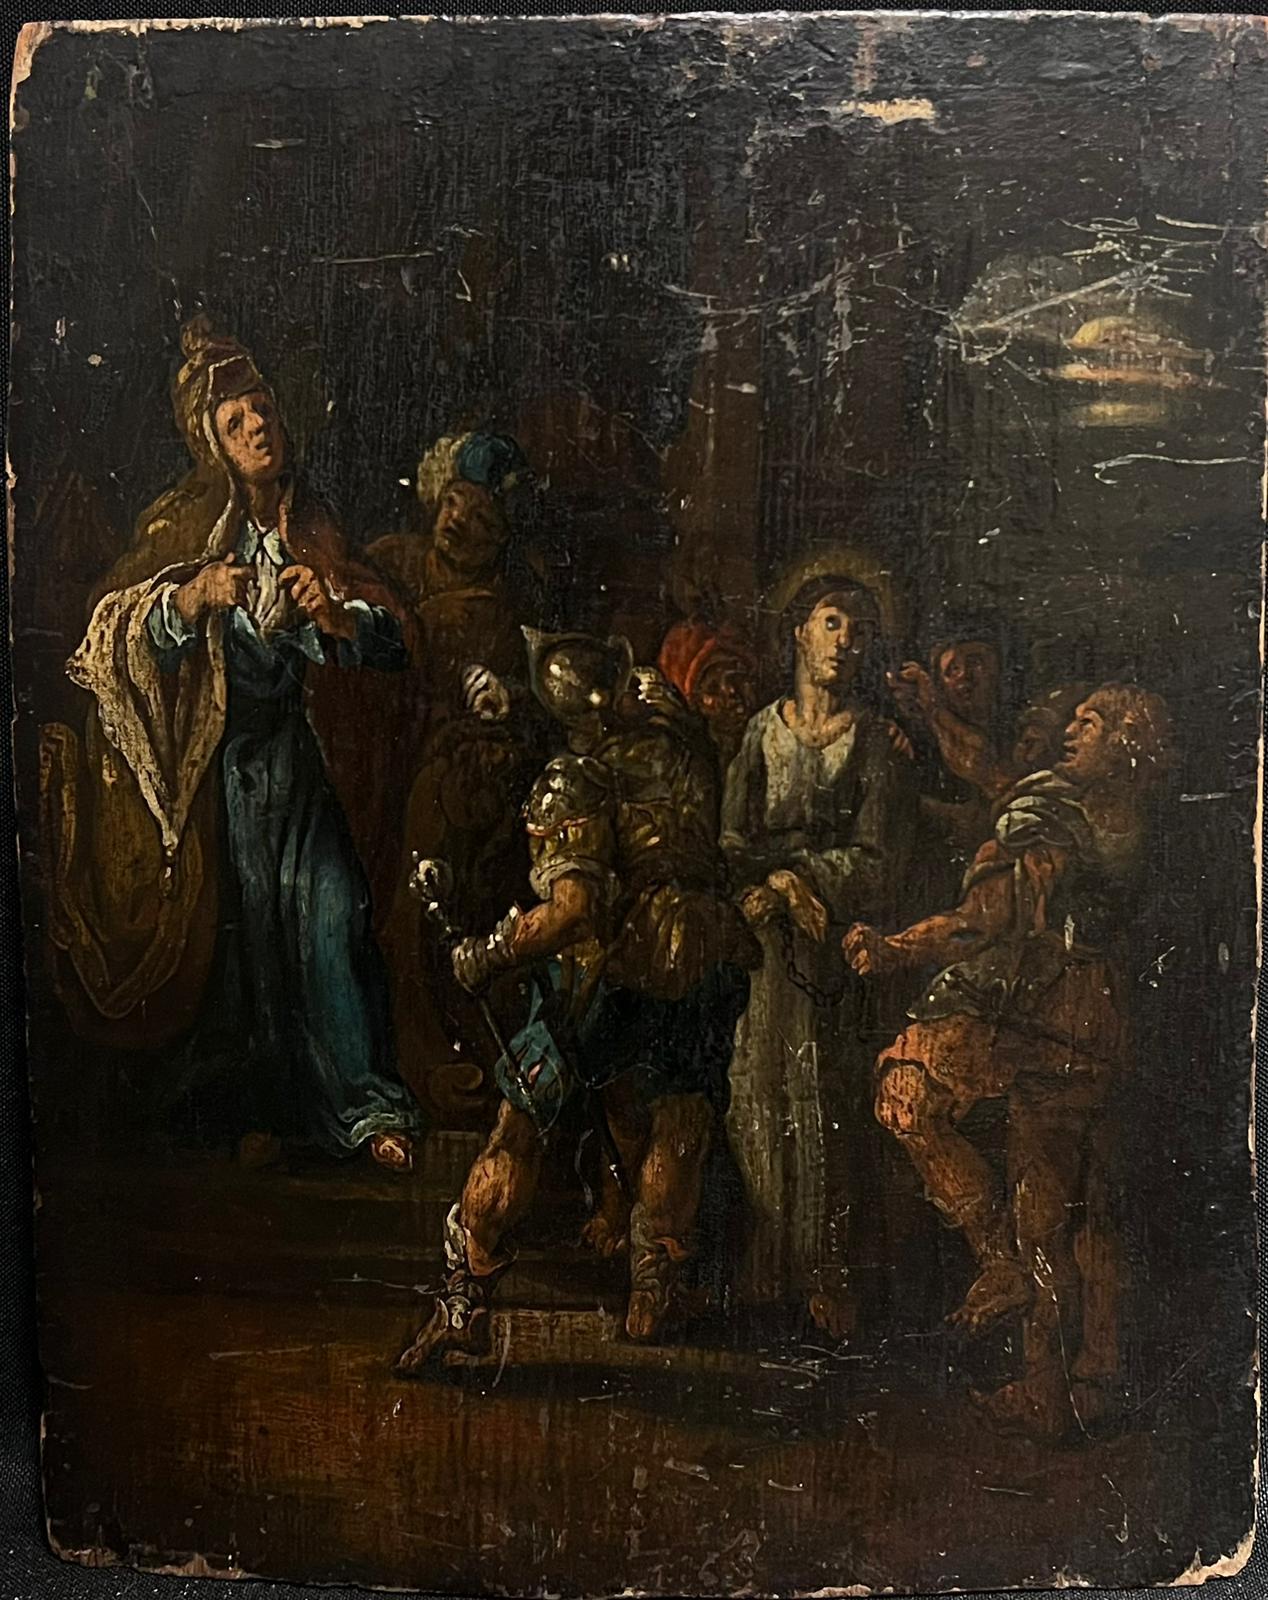 The Trial of Christ
Dutch Old Master, 17th century
oil on panel, unframed
panel: 11 x 7.5 inches
provenance: private collection, England, 
Christies auction stencil marks verso
condition: several surface scratches but overall good and sound